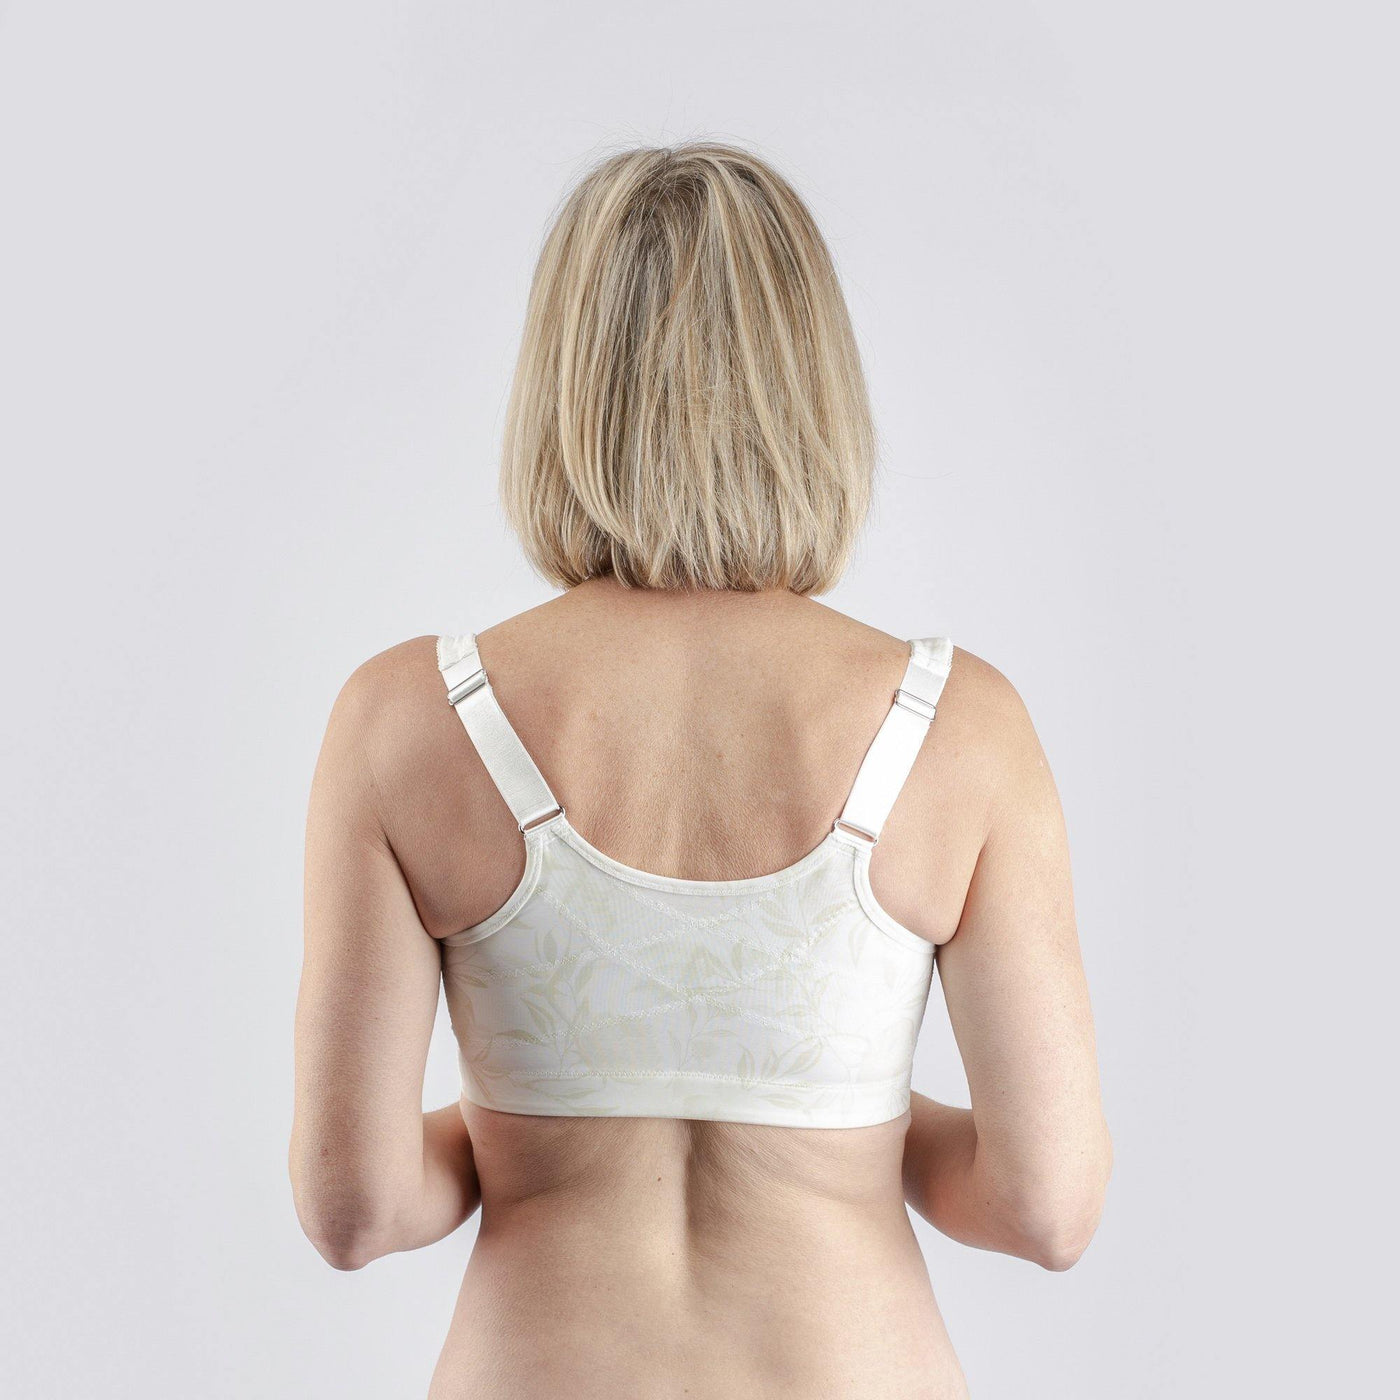 Back Support Silk & Organic Cotton Sports Bra (Floral Spritz & Lily white) - Juliemay Lingerie